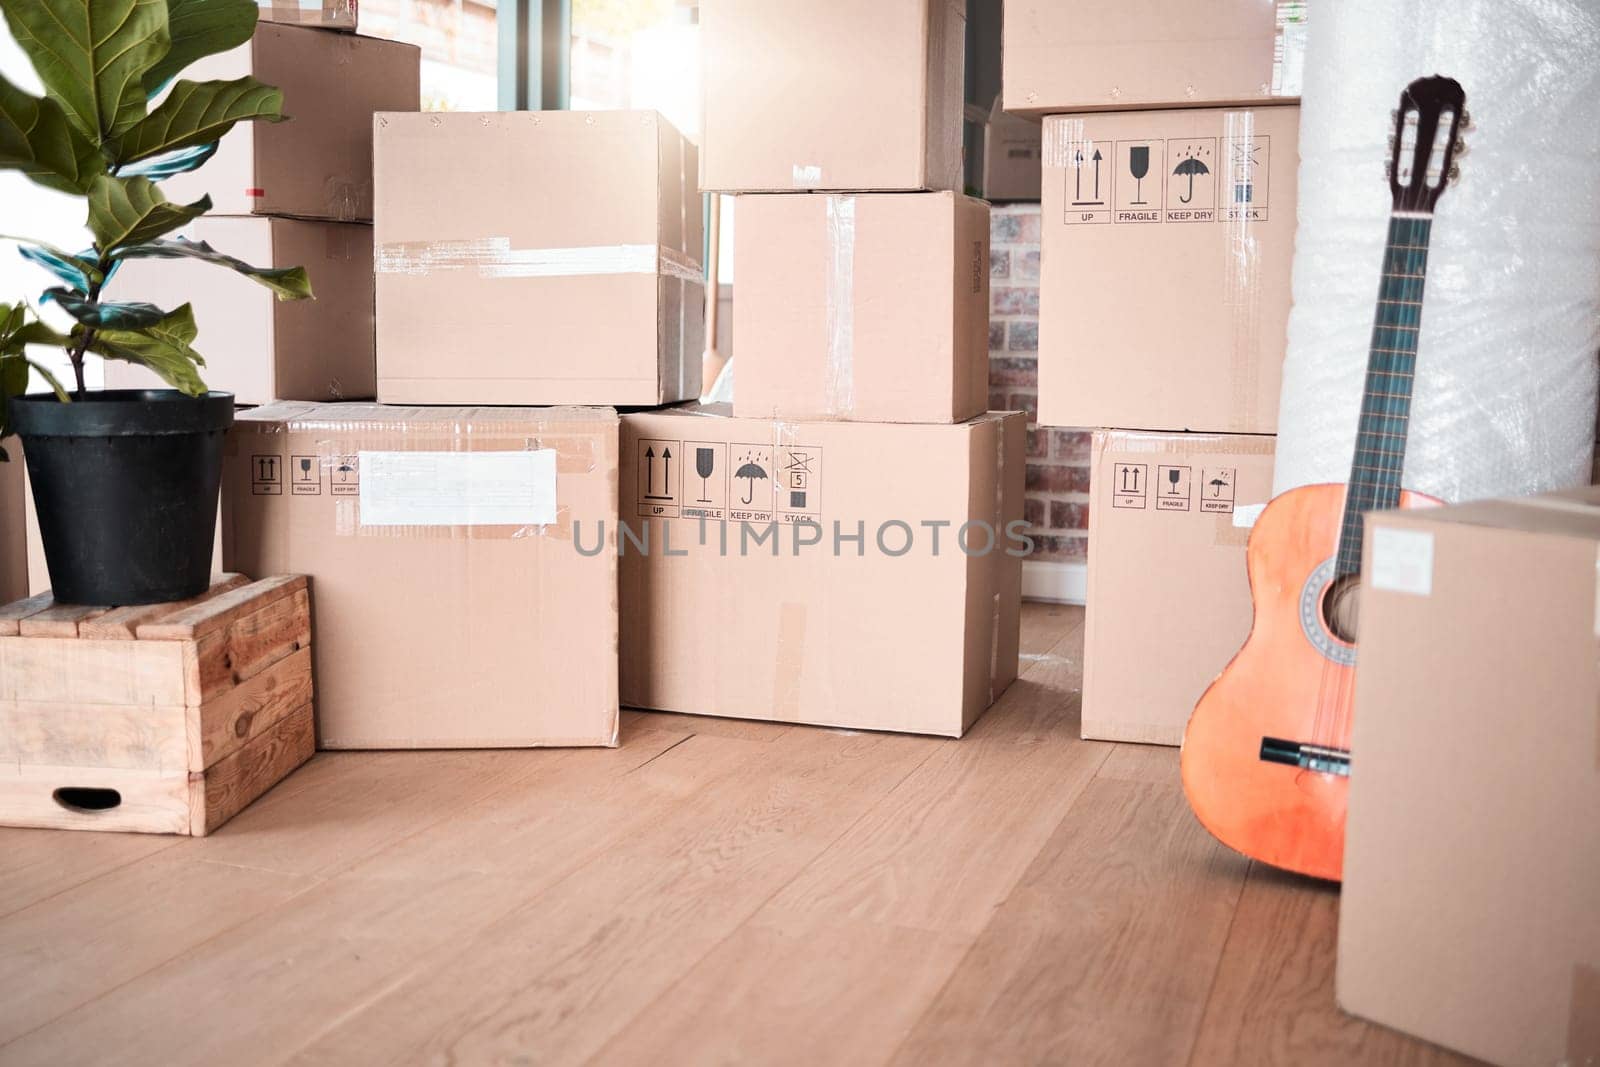 Interior, storage and box by plant in new house, apartment or property for moving, relocating or purchase a home. Shipping, real estate or mortgage for renovation with guitar in space, lounge or room.